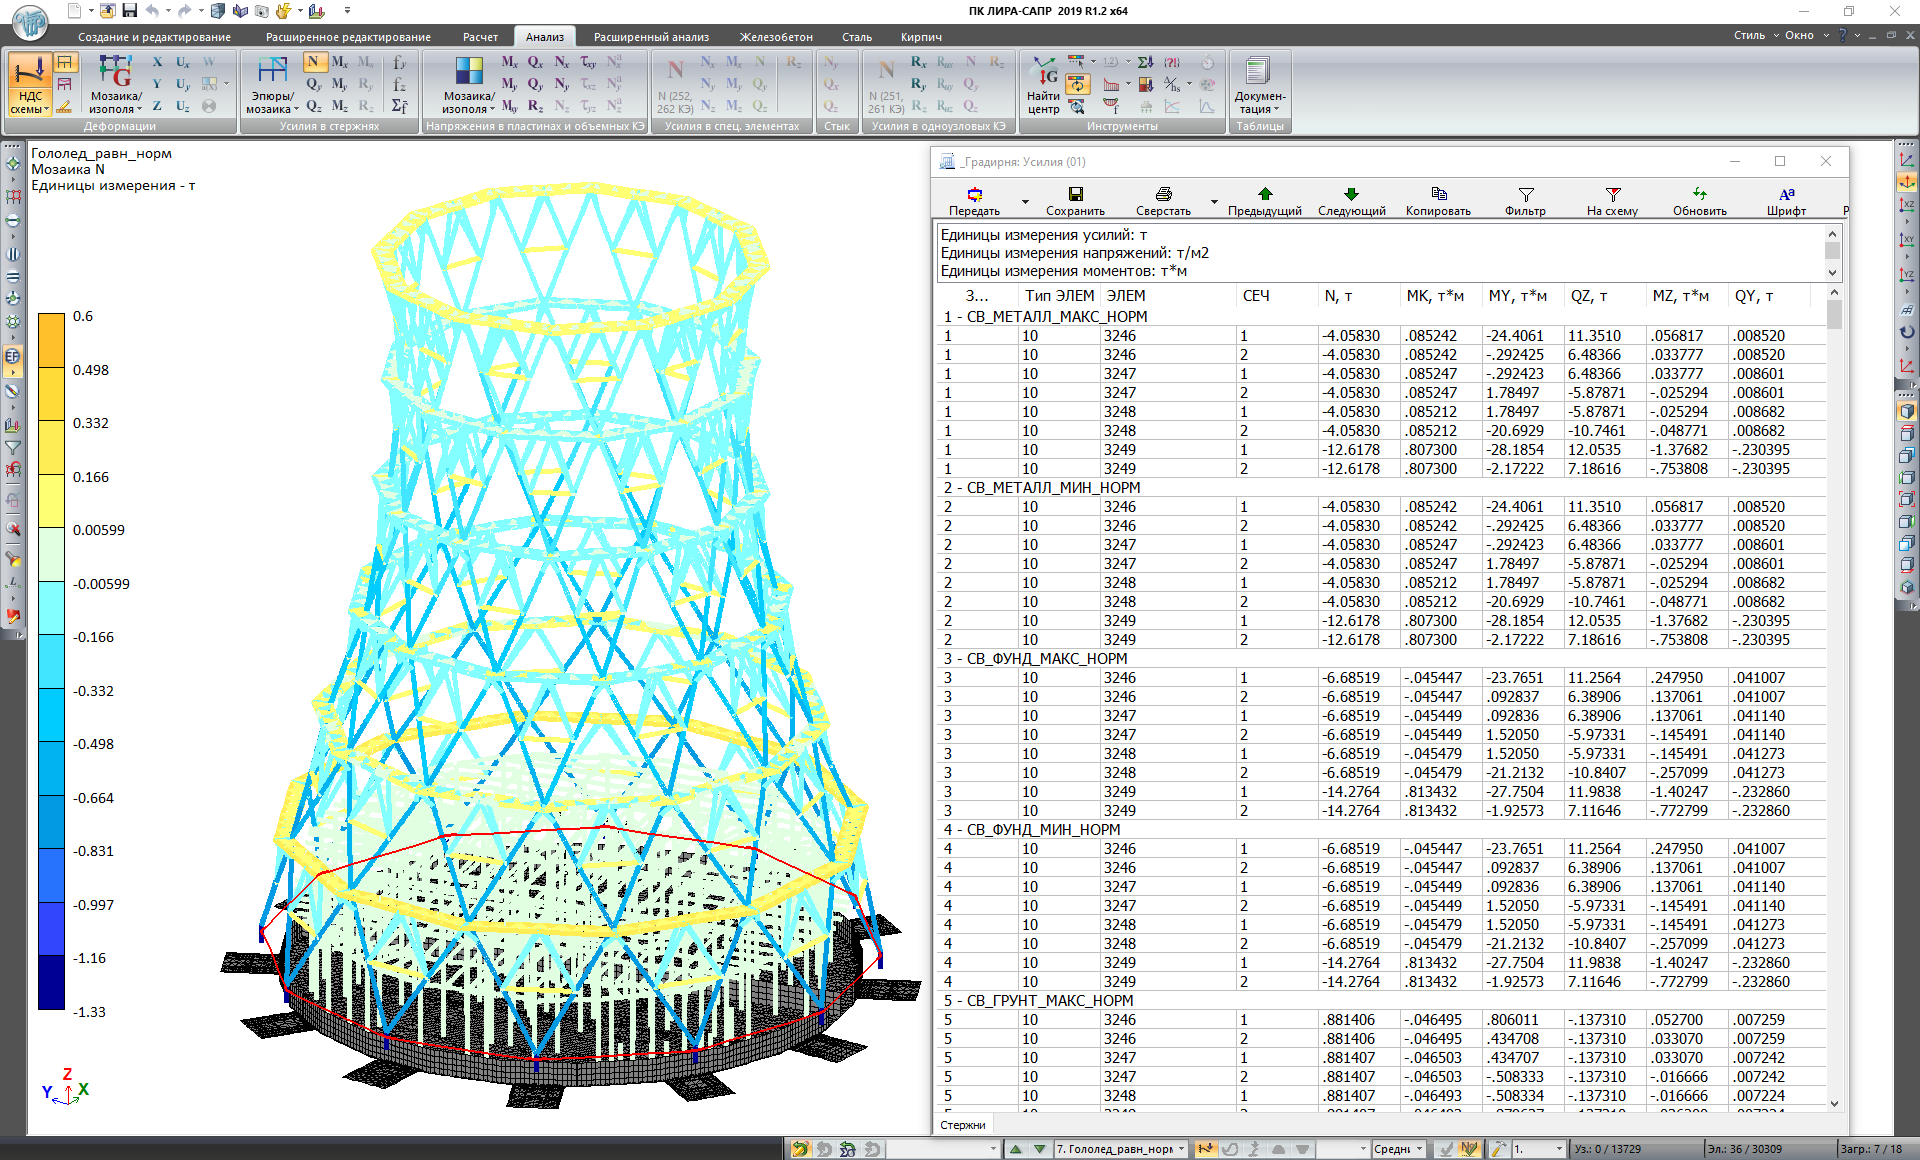 Cooling tower analysis results